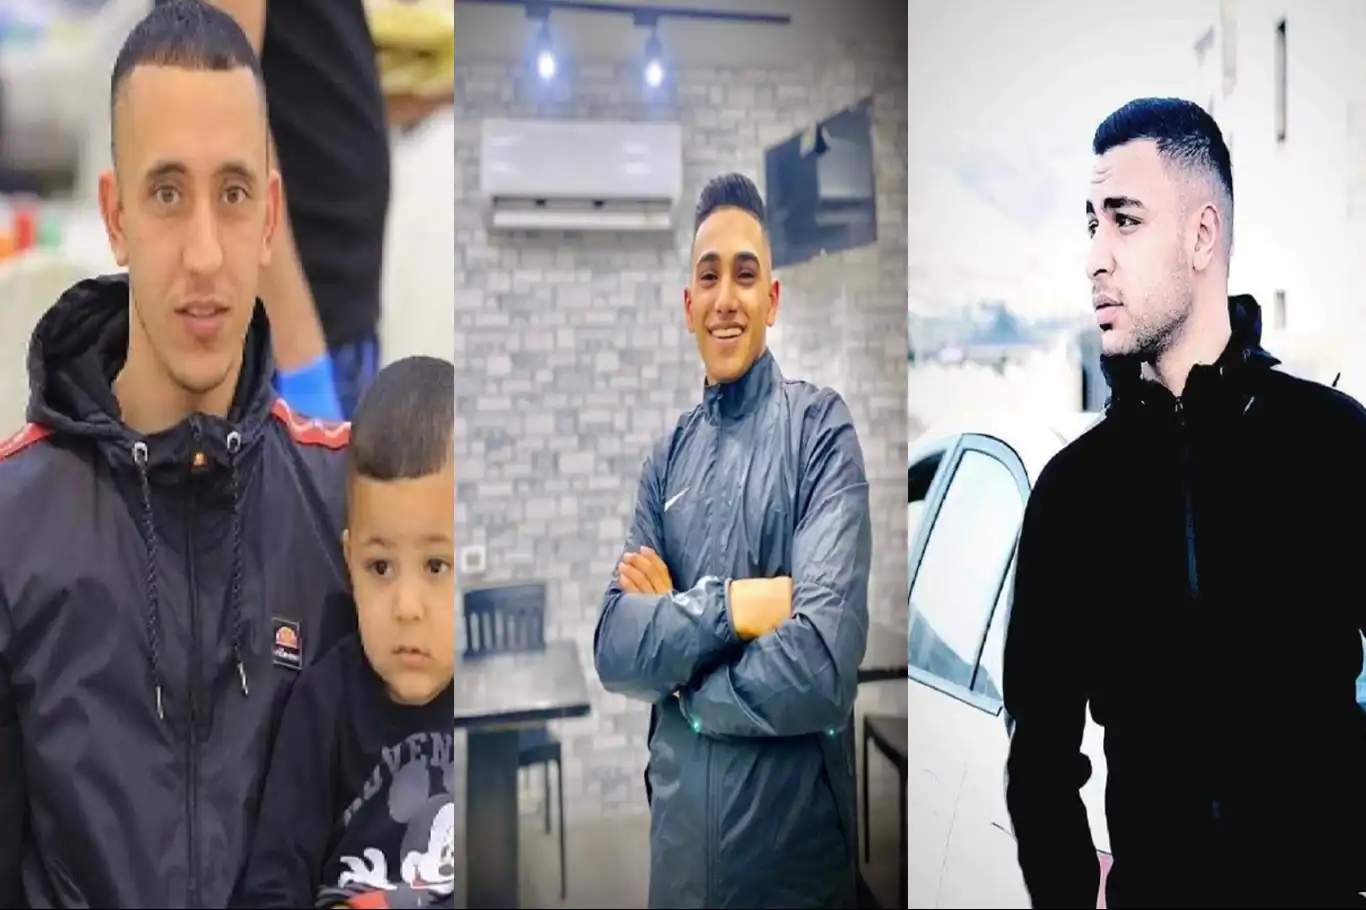 Three Palestinians martyred, others injured by IOF gunfire in W. Bank